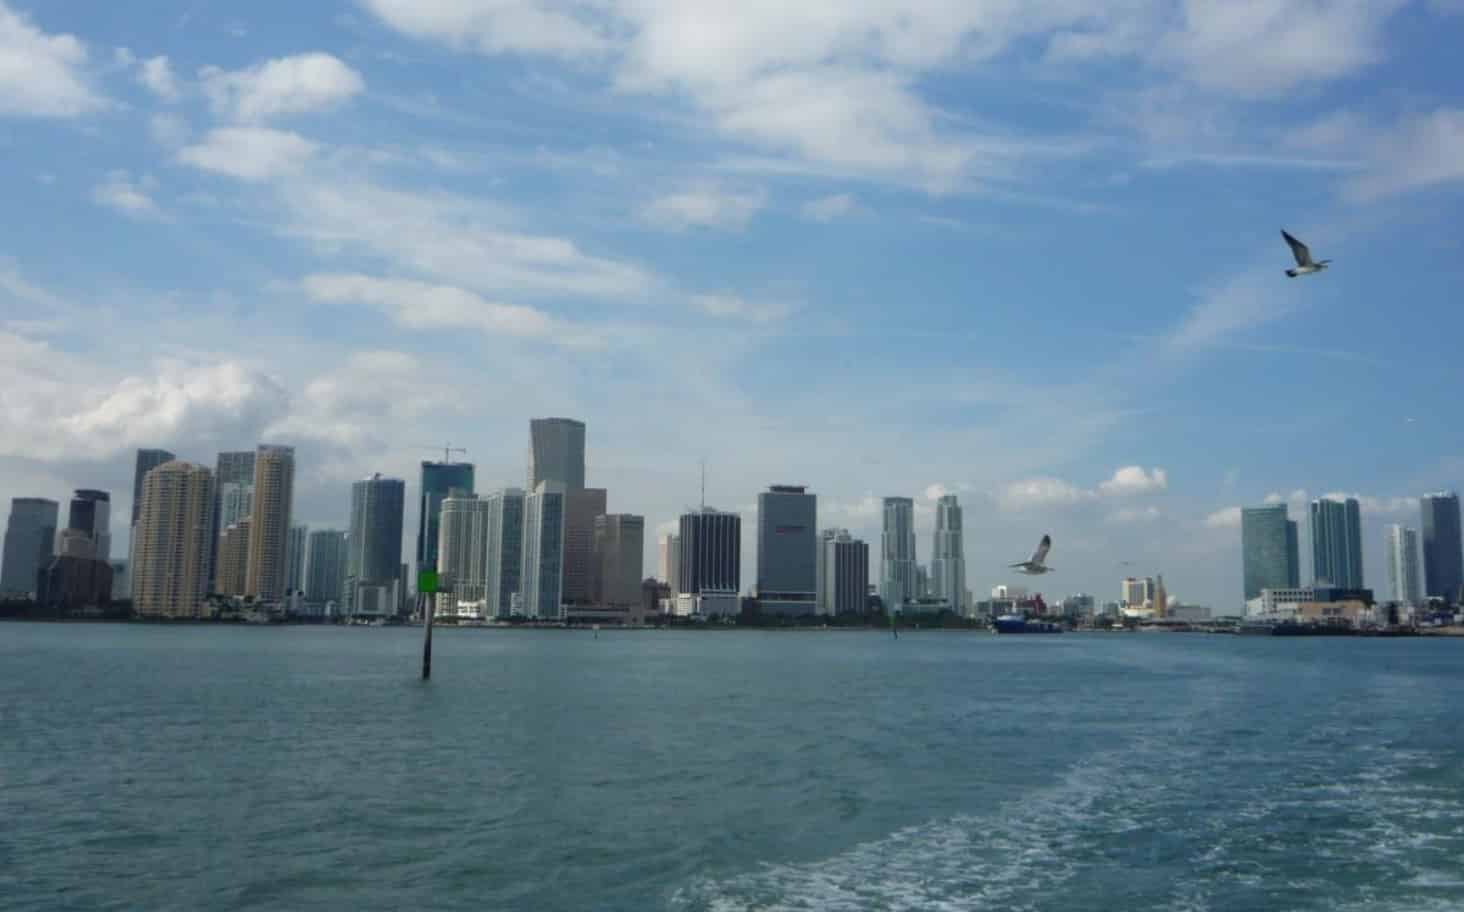 4-Hour-Sport-Fishing-Excursion-by-Gray-Line-Miami